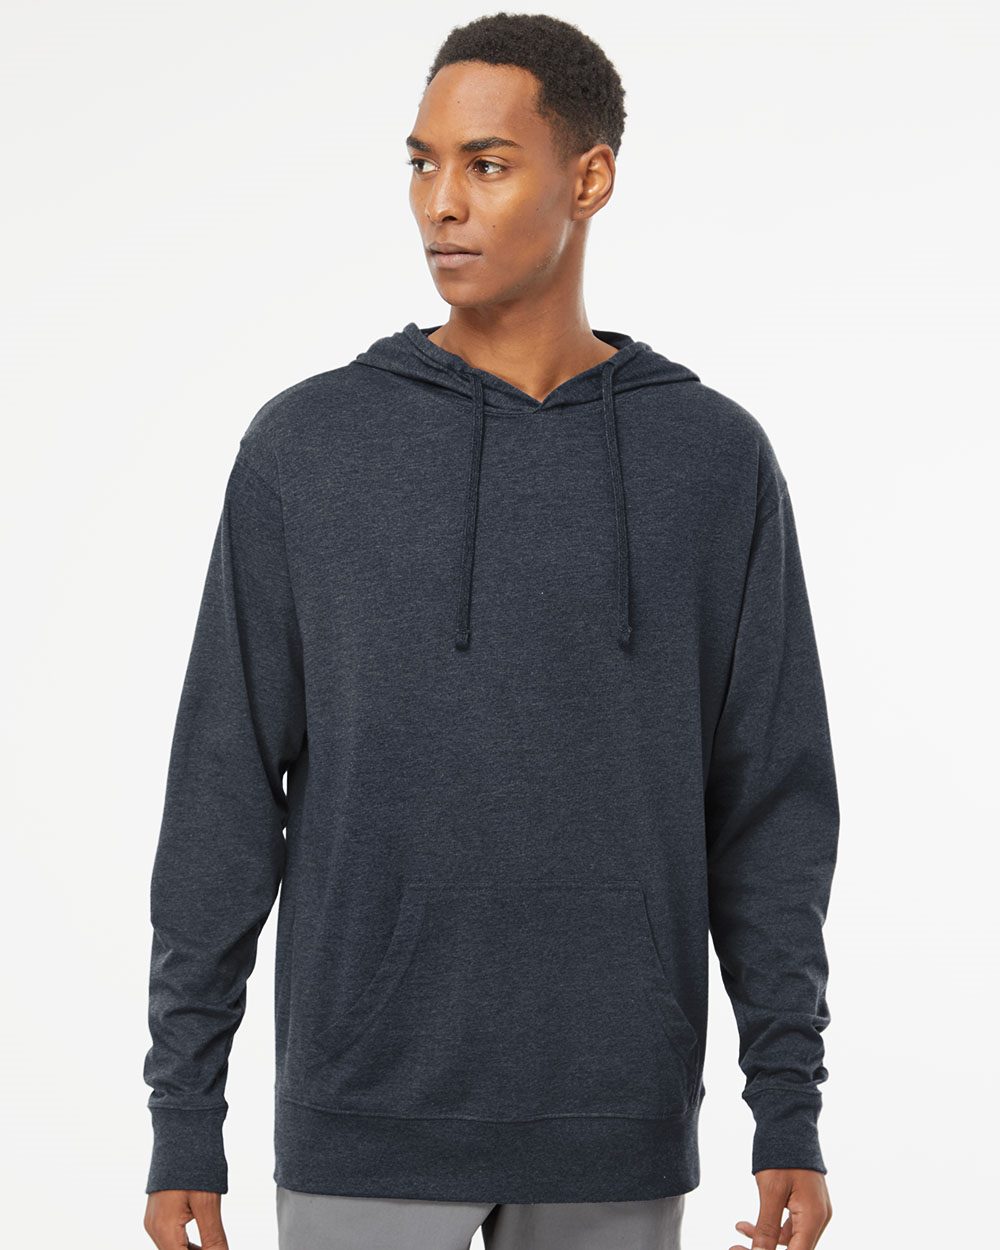 Independent Trading Co. SS150J Lightweight Hooded Pullover T-Shirt - Black - M